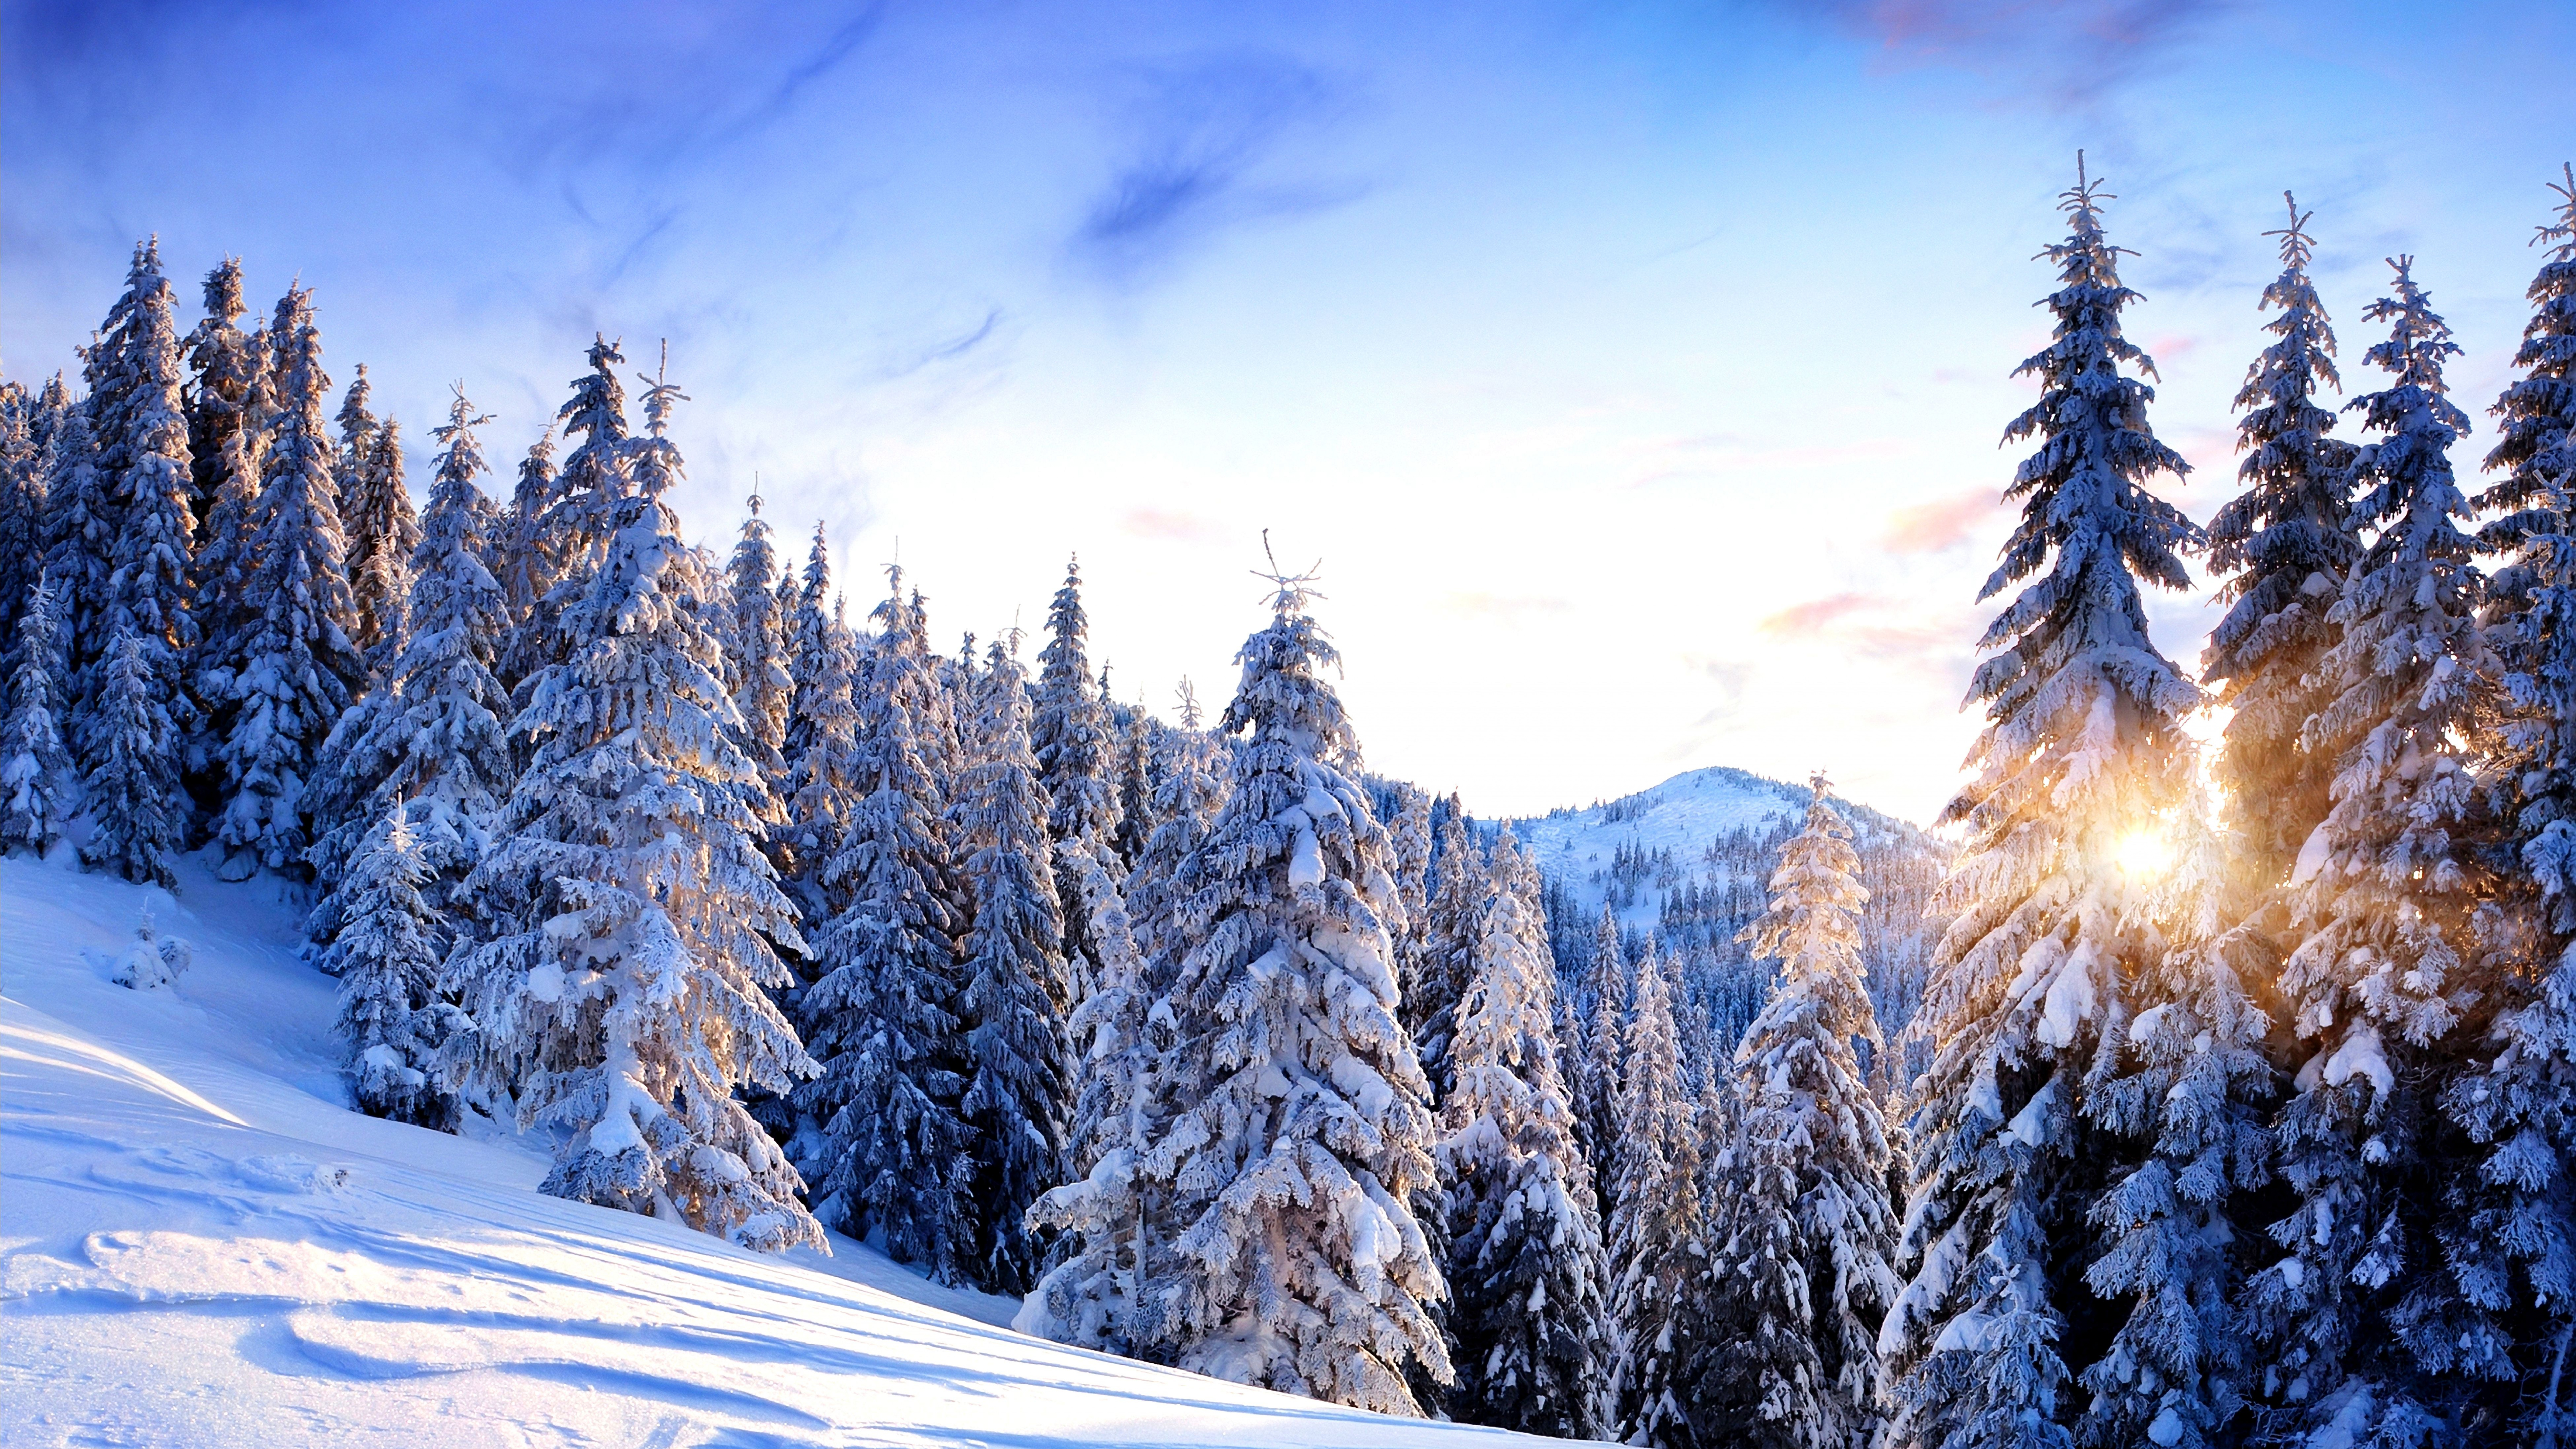 Snow Covered Pine Trees and Mountains During Daytime. Wallpaper in 7680x4320 Resolution